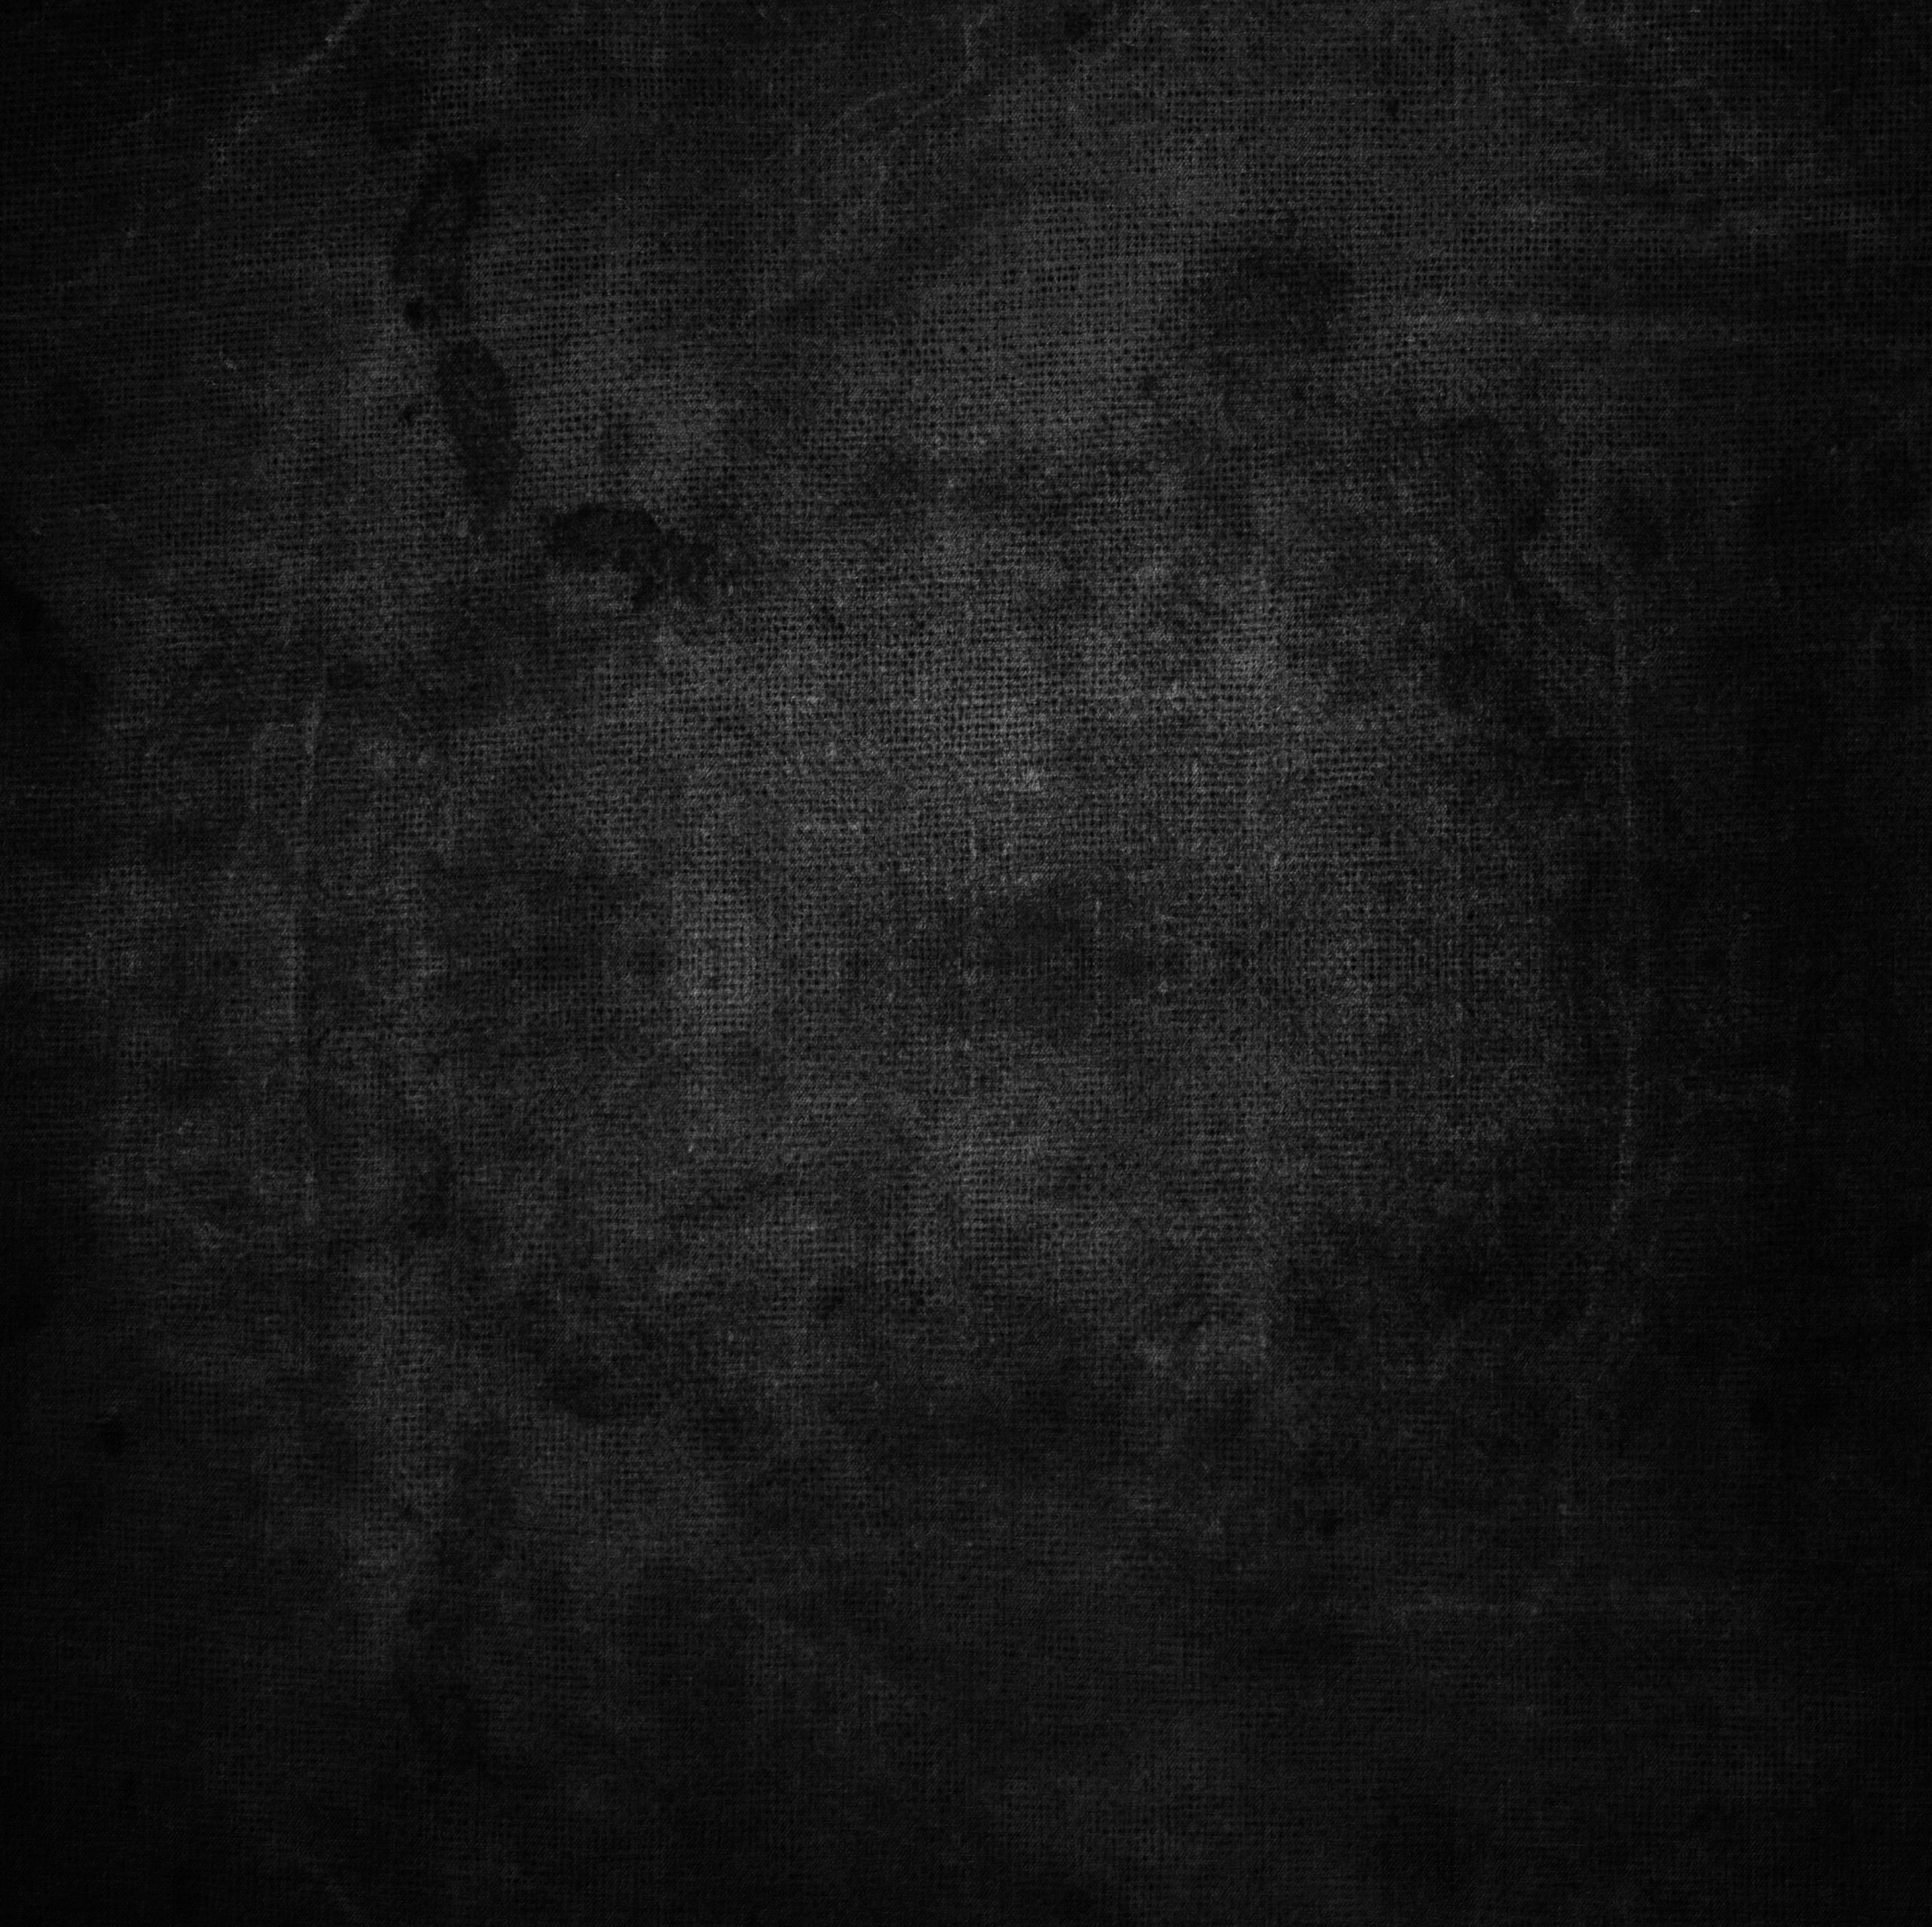 https://www.myfreetextures.com/wp-content/uploads/2019/11/abstract-black-grunge-texture-scaled.jpg